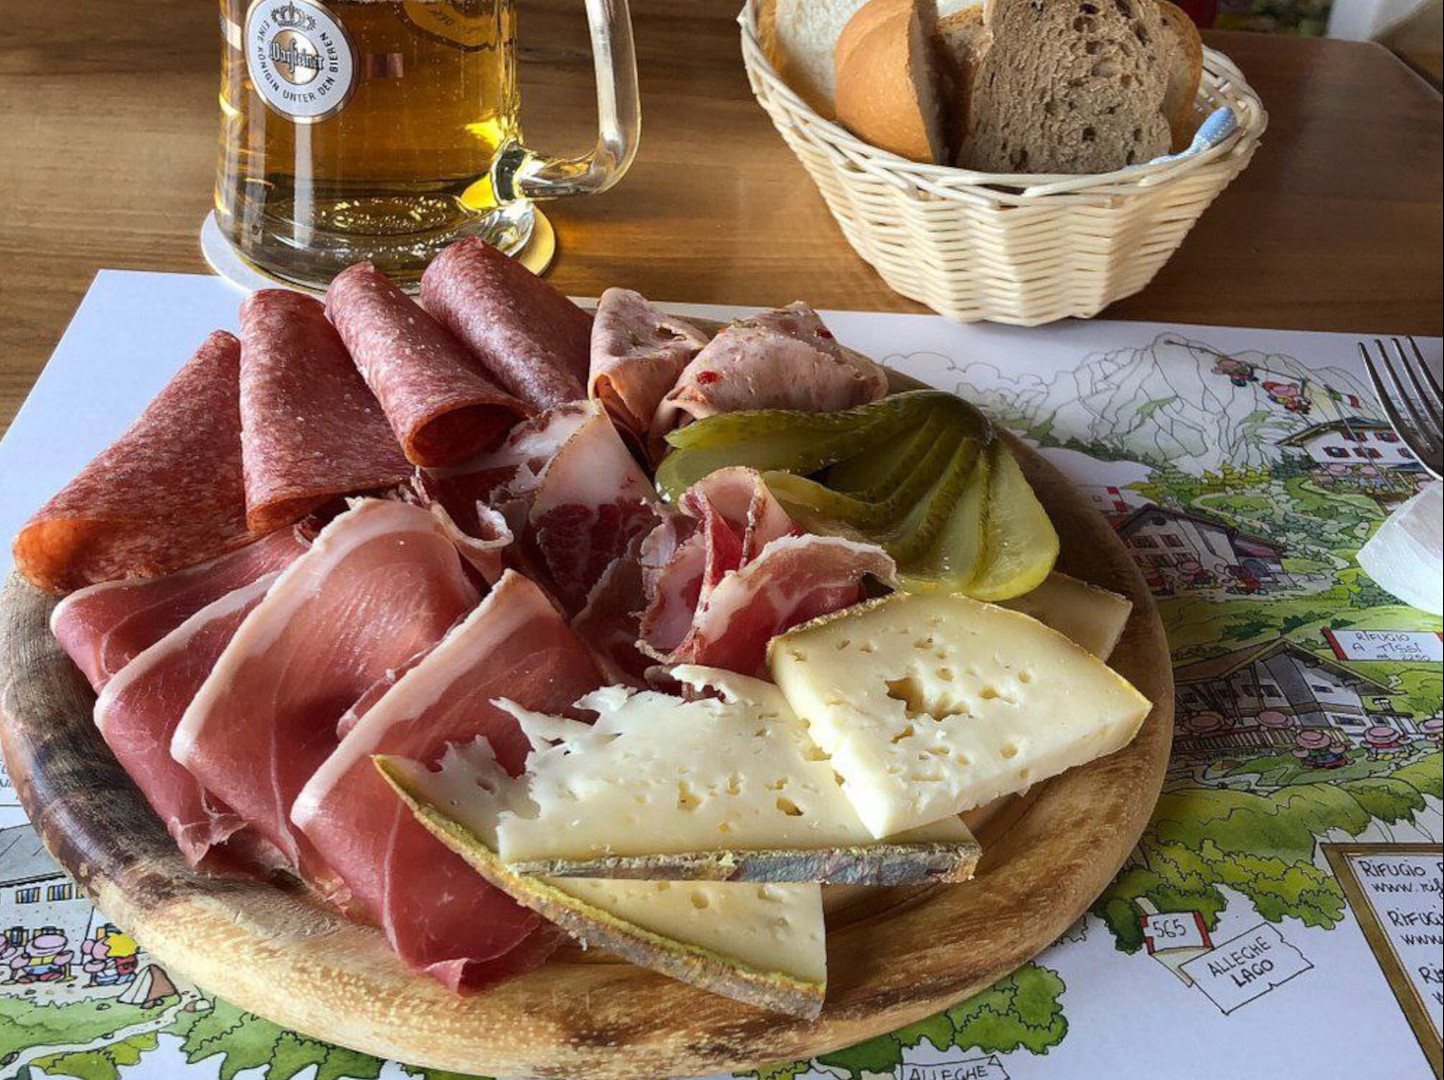 Mixed platter of cold cuts and cheeses